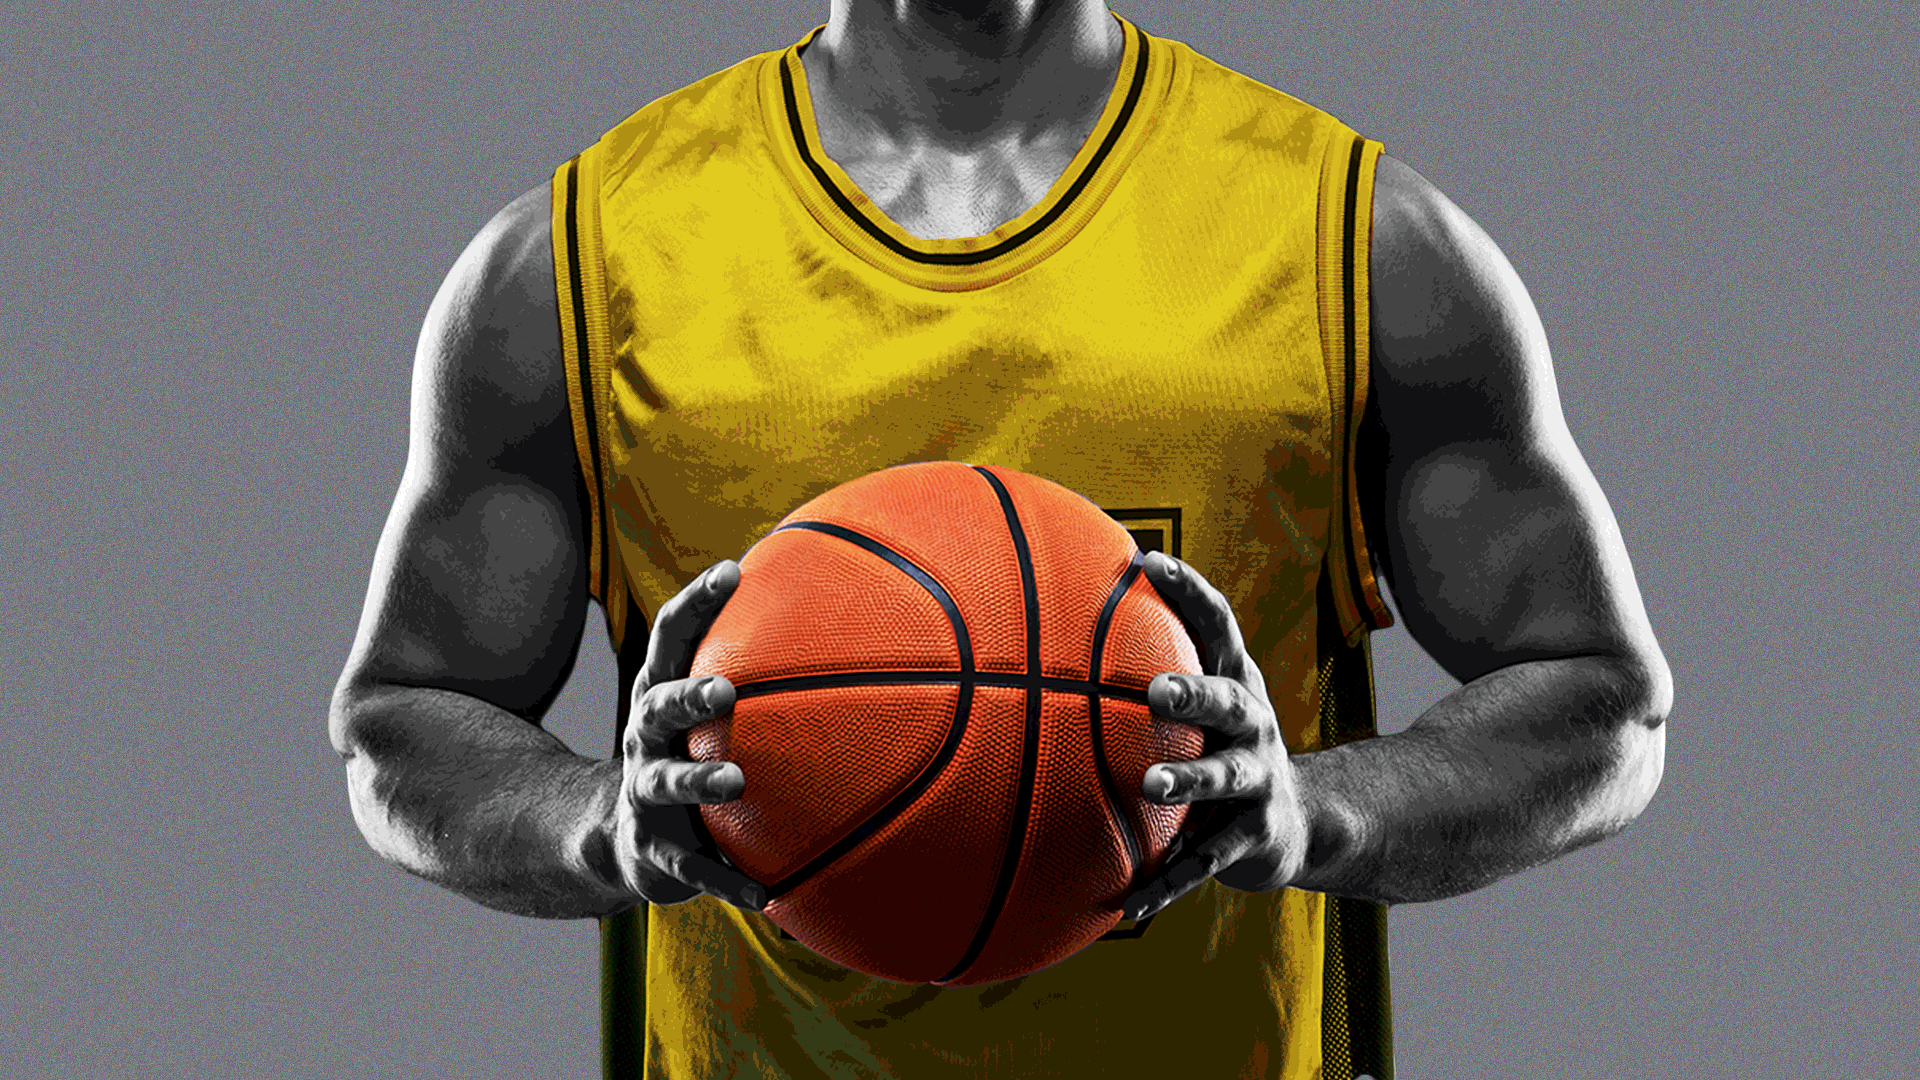 GIF of a basketball player with a jersey changing colors.